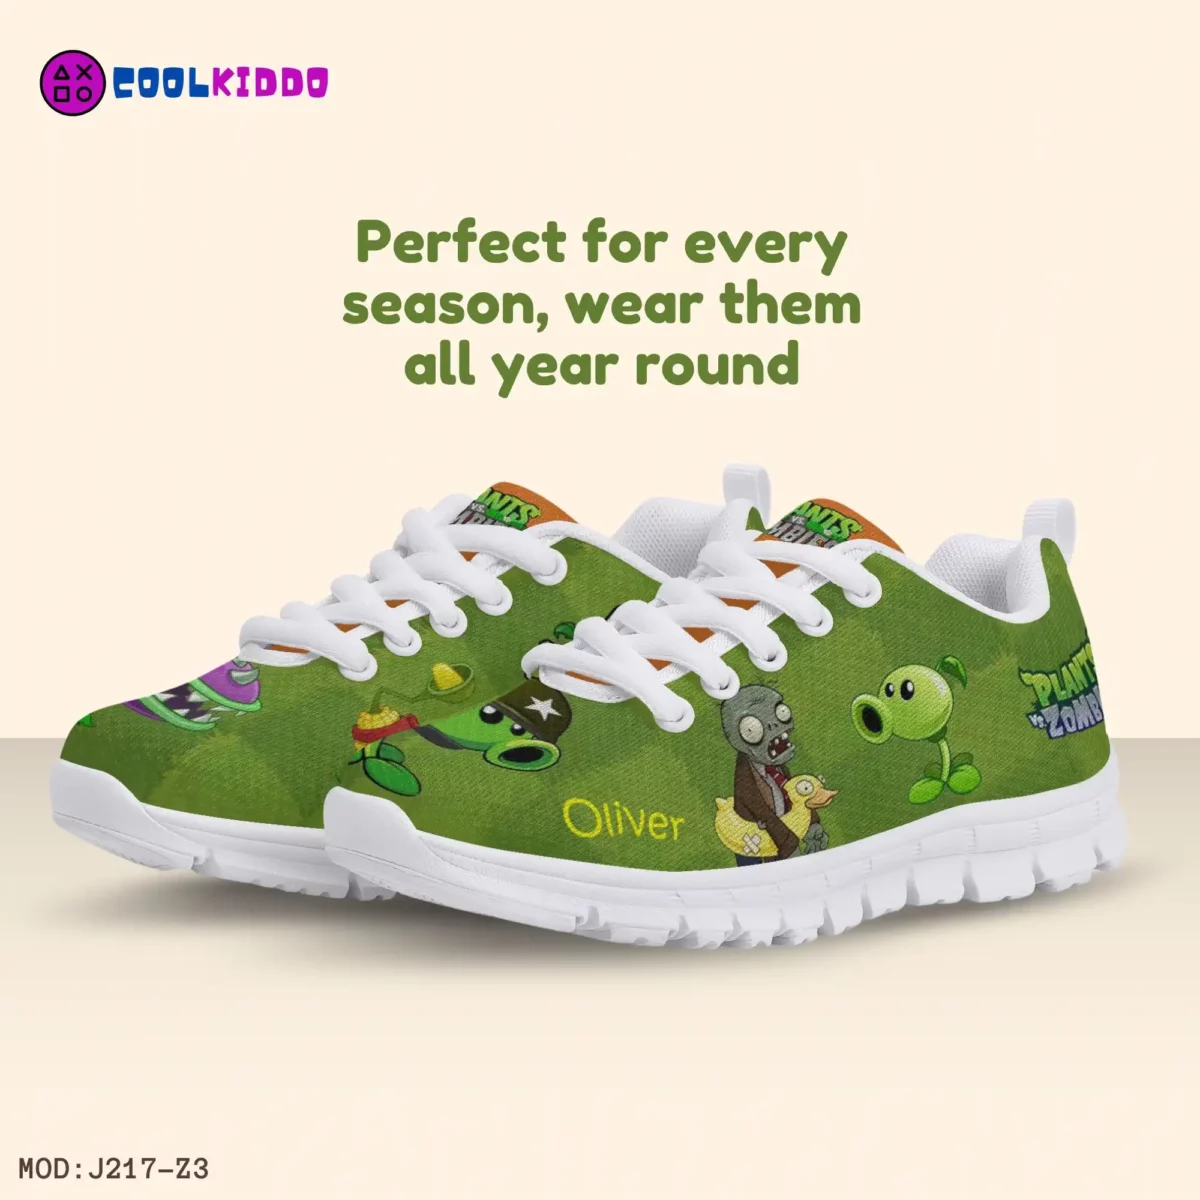 Personalized Plants vs Zombies Video Game Inspired Athletic Shoes for Kids/Youth Lightweight Mesh Sneakers Cool Kiddo 16